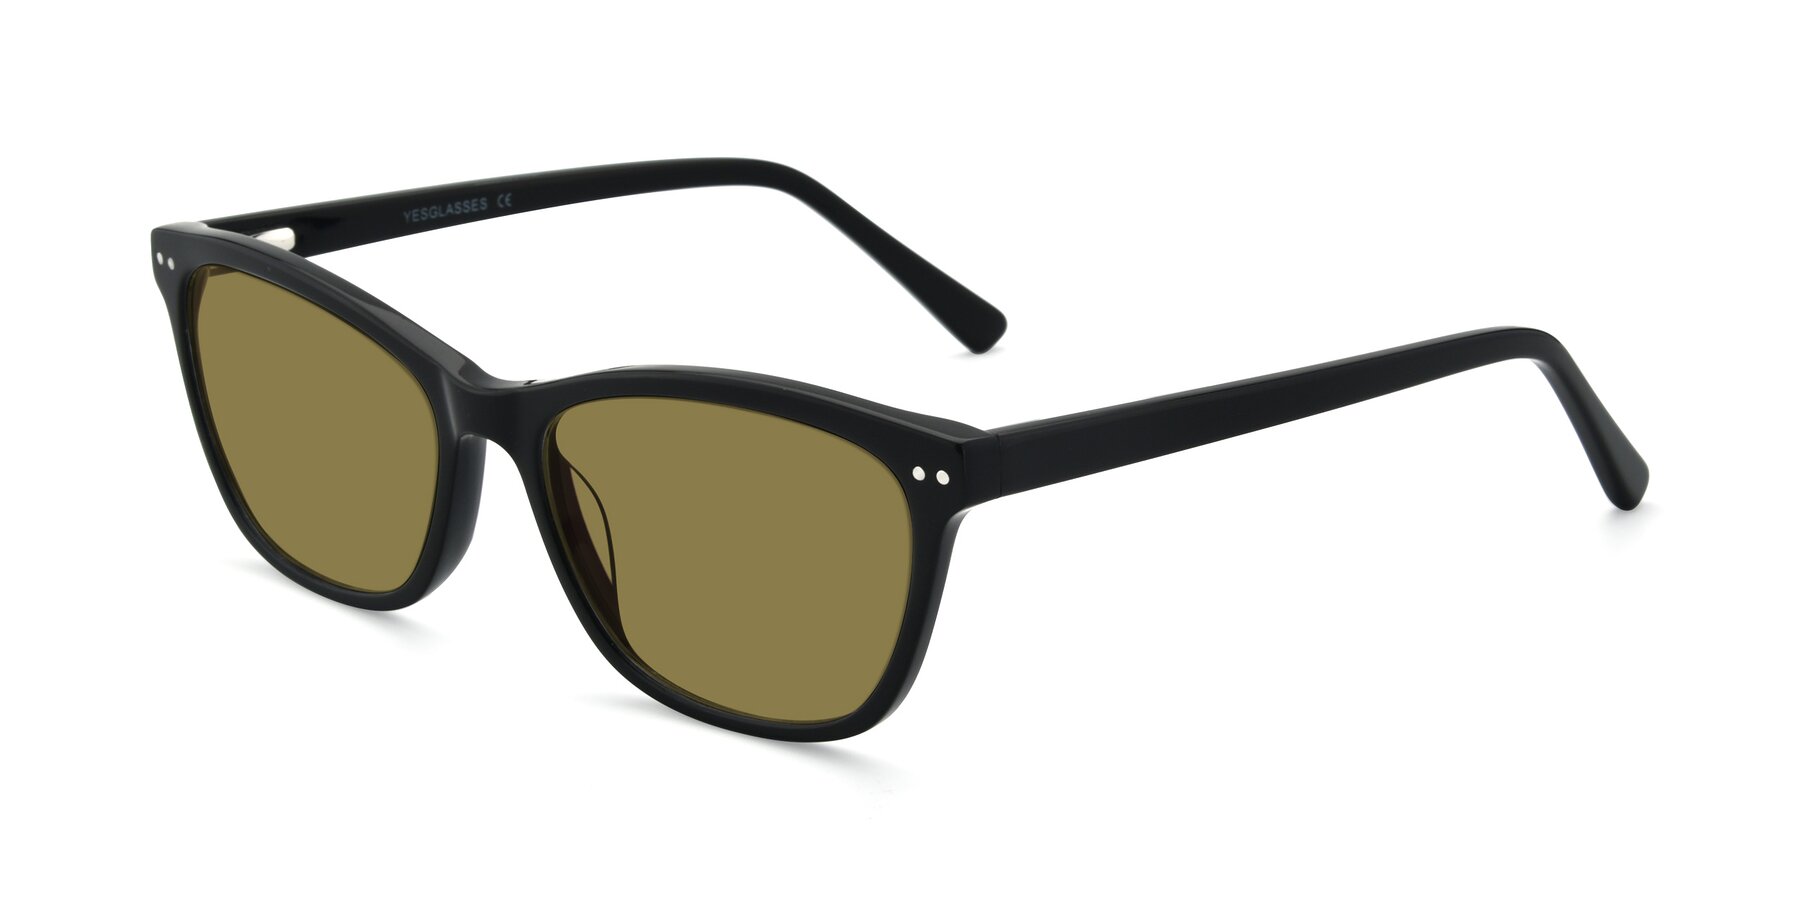 Angle of 17350 in Black with Brown Polarized Lenses